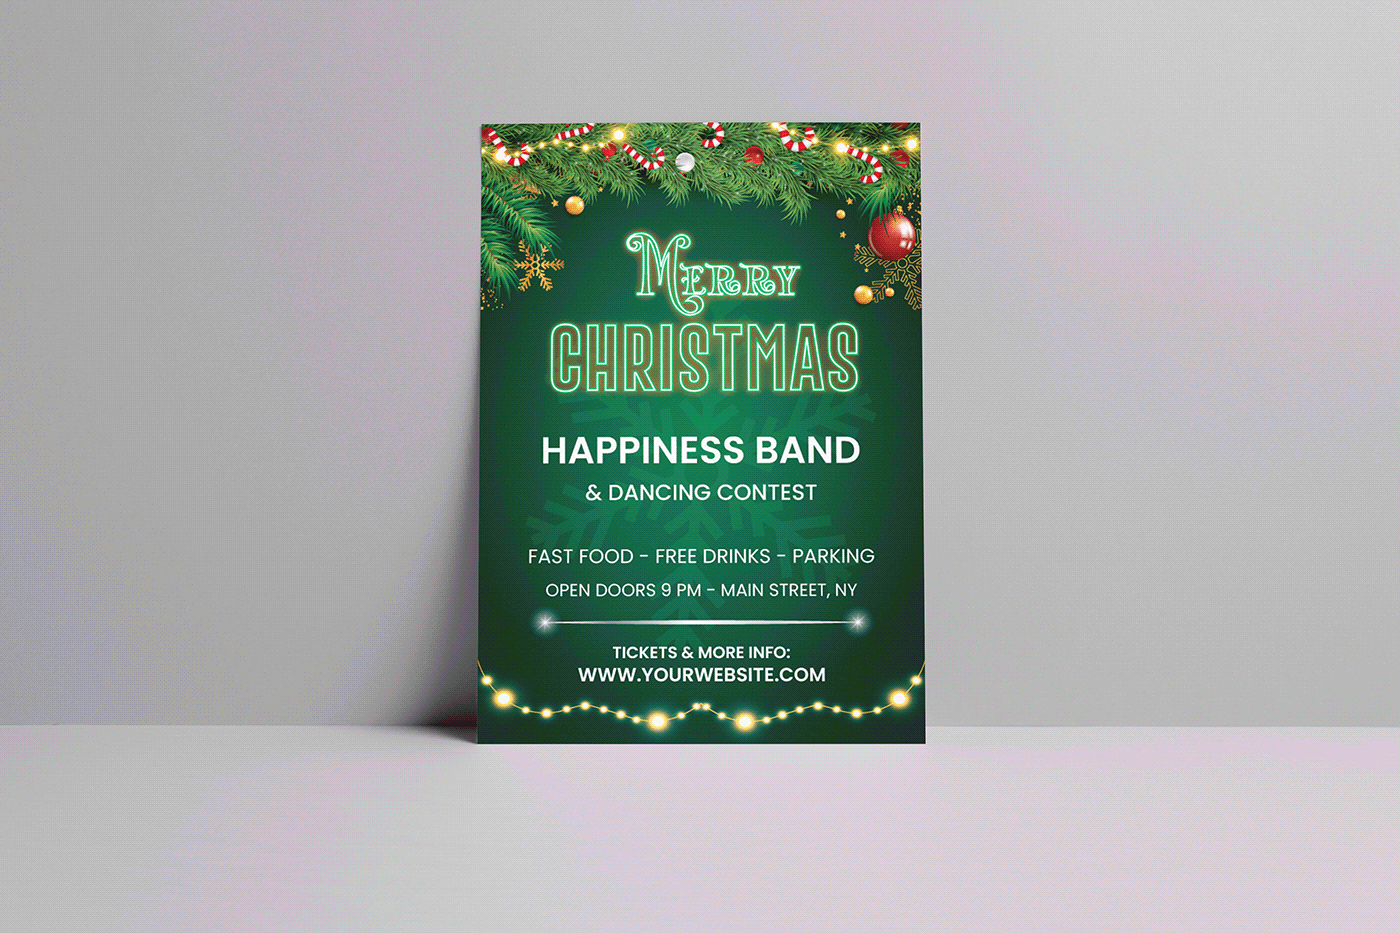 merry christmas party FREE flyer Free flyer mockup calibration flyer Christmas Invitation christmas party christmas party flyer Merry christmas fllyer Merry Christmas Poster poster design christmas